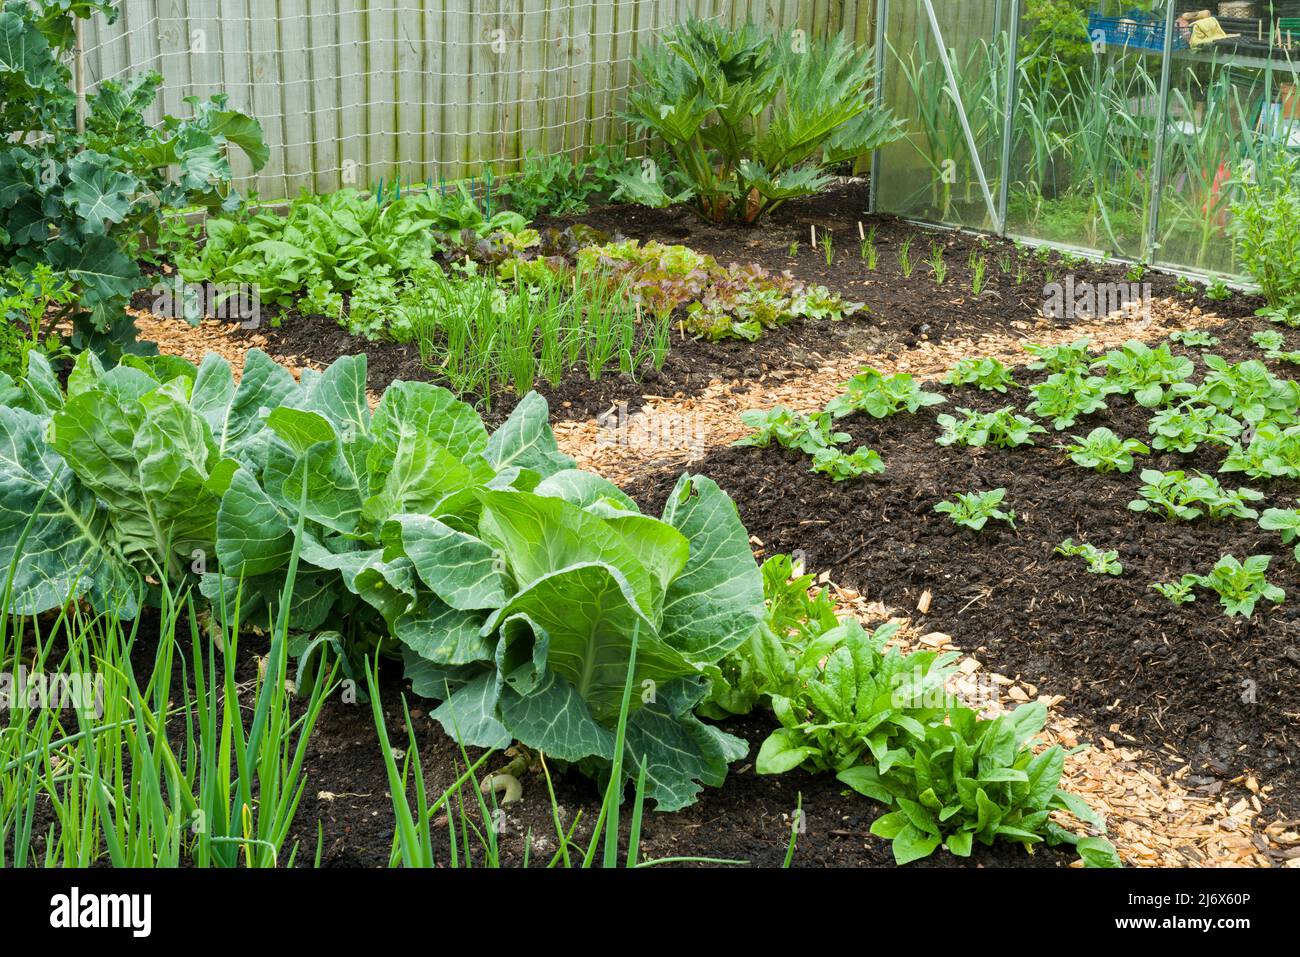 A no-dig style vegetable garden in spring where compost is spread over the soil surface as a mulch and natural processes are allowed to perform cultivation. Stock Photo